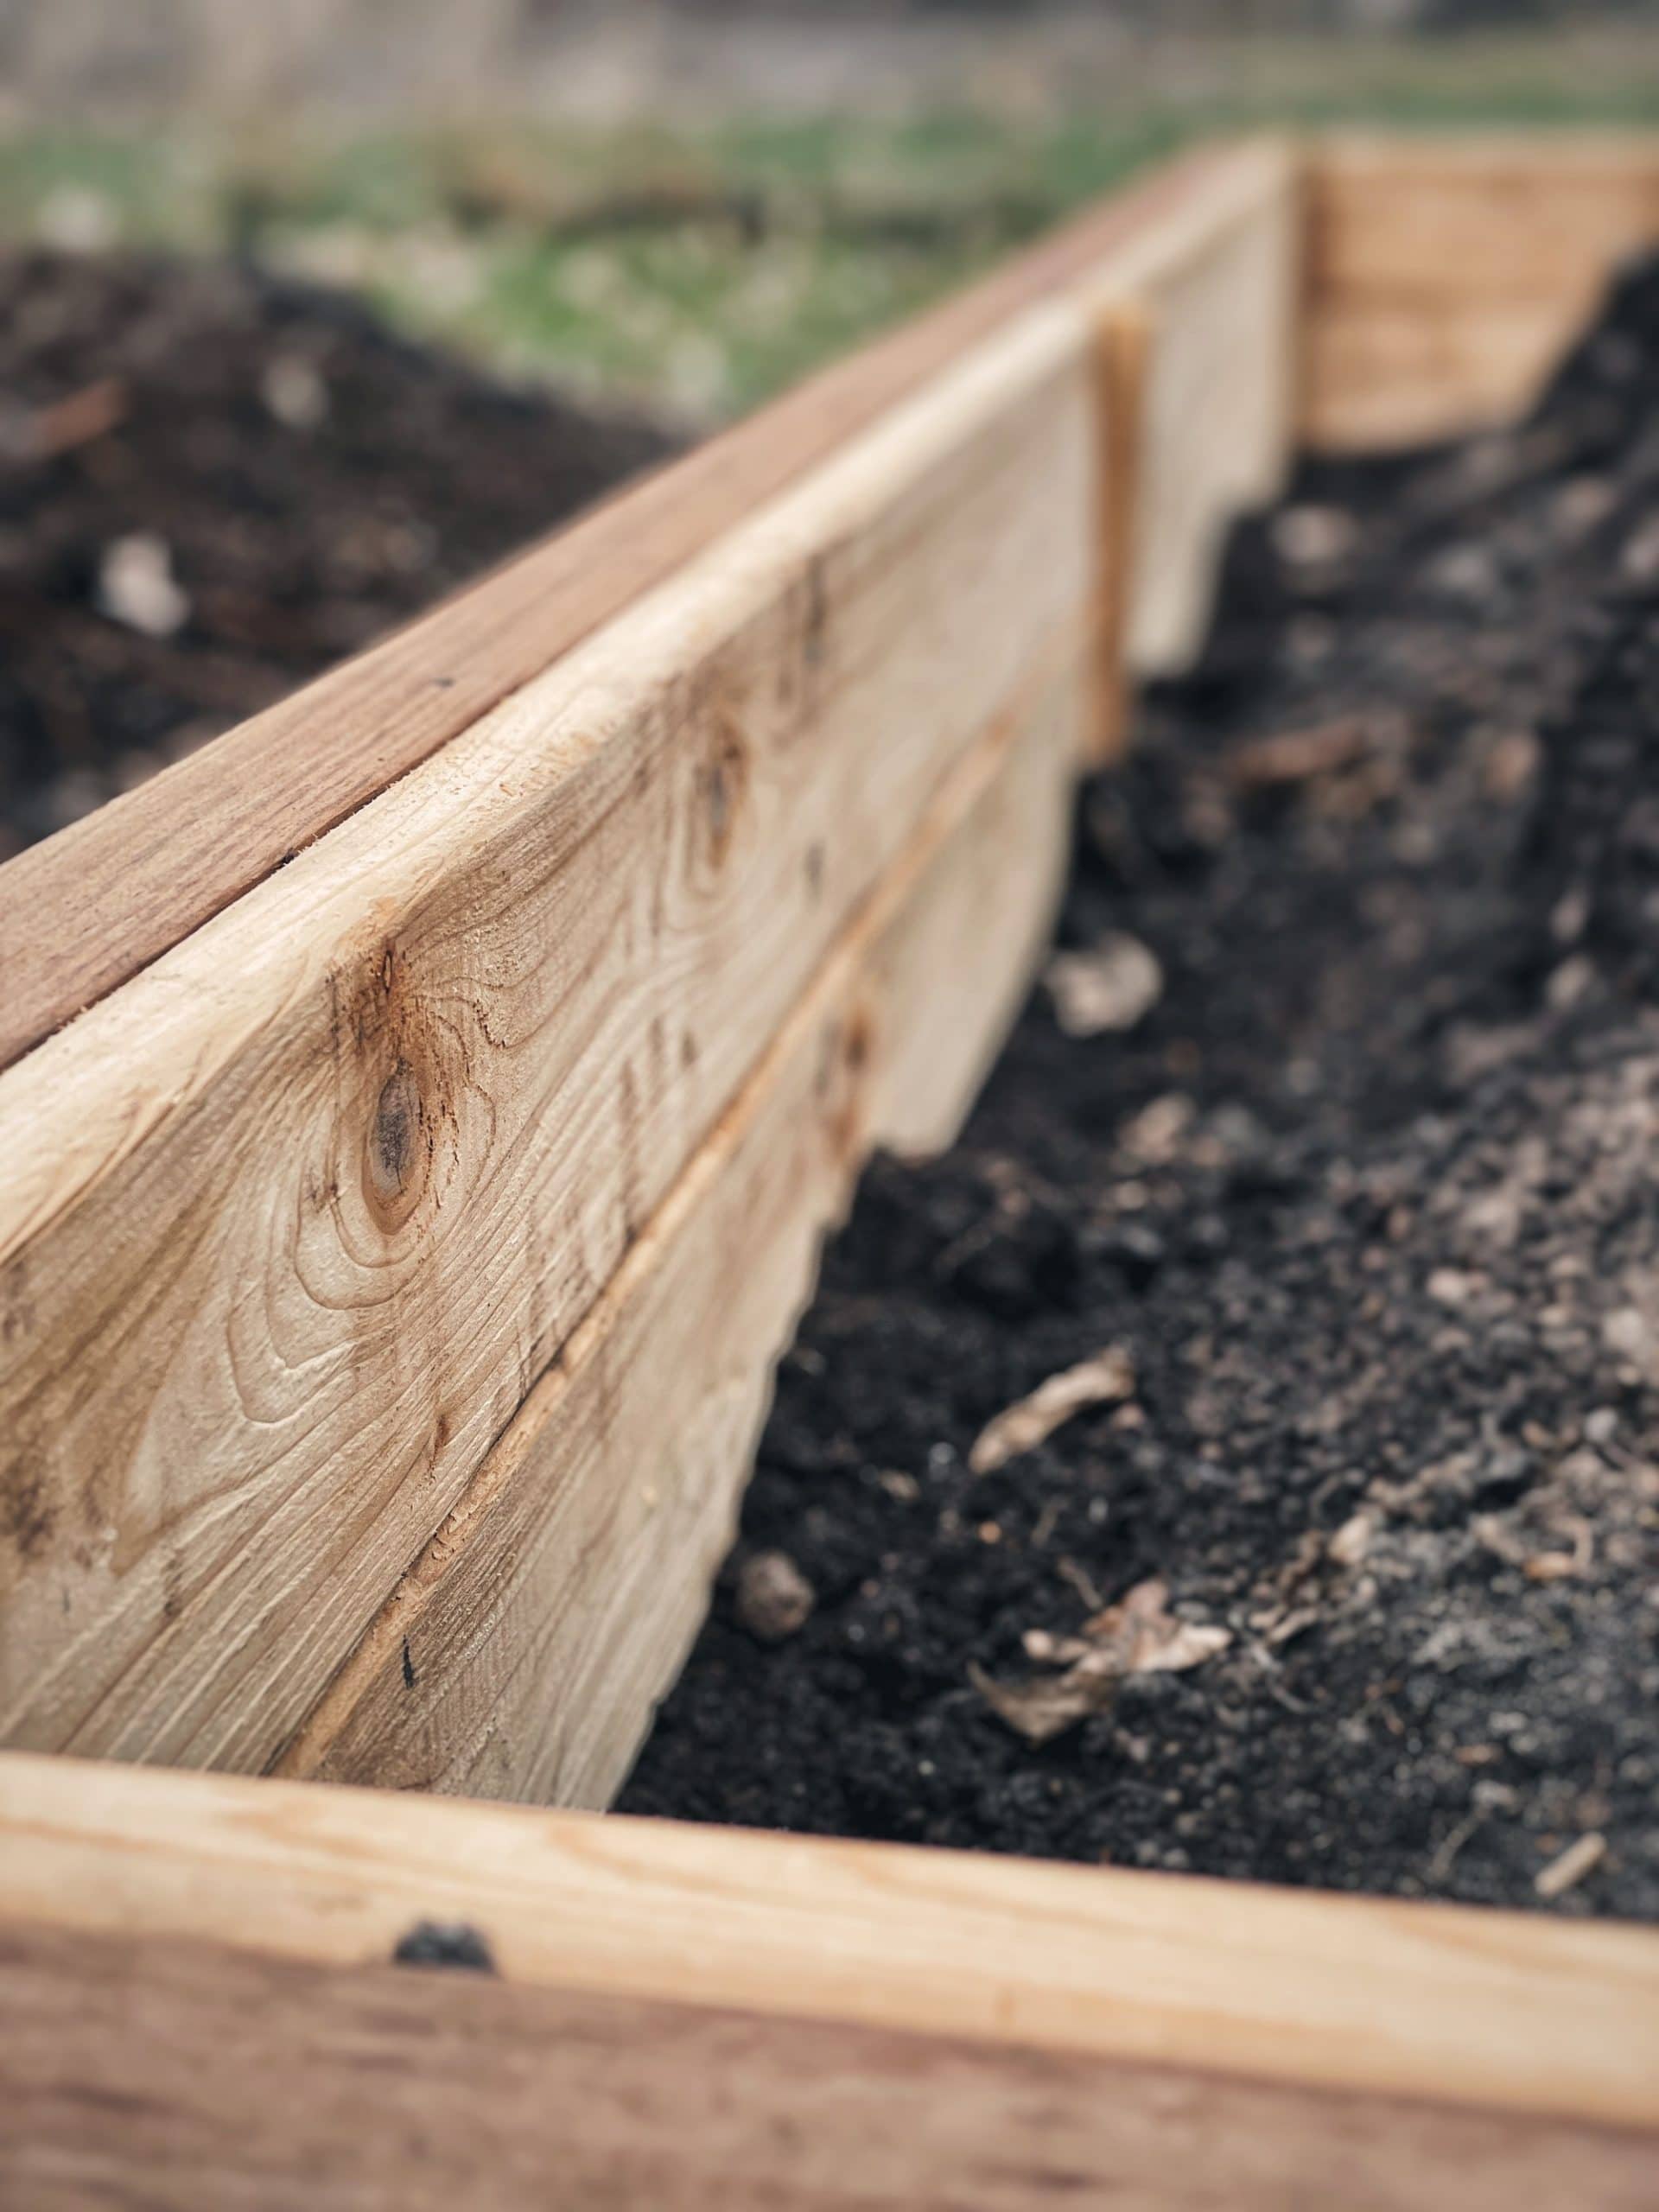 A close-up photo of an empty raised bed